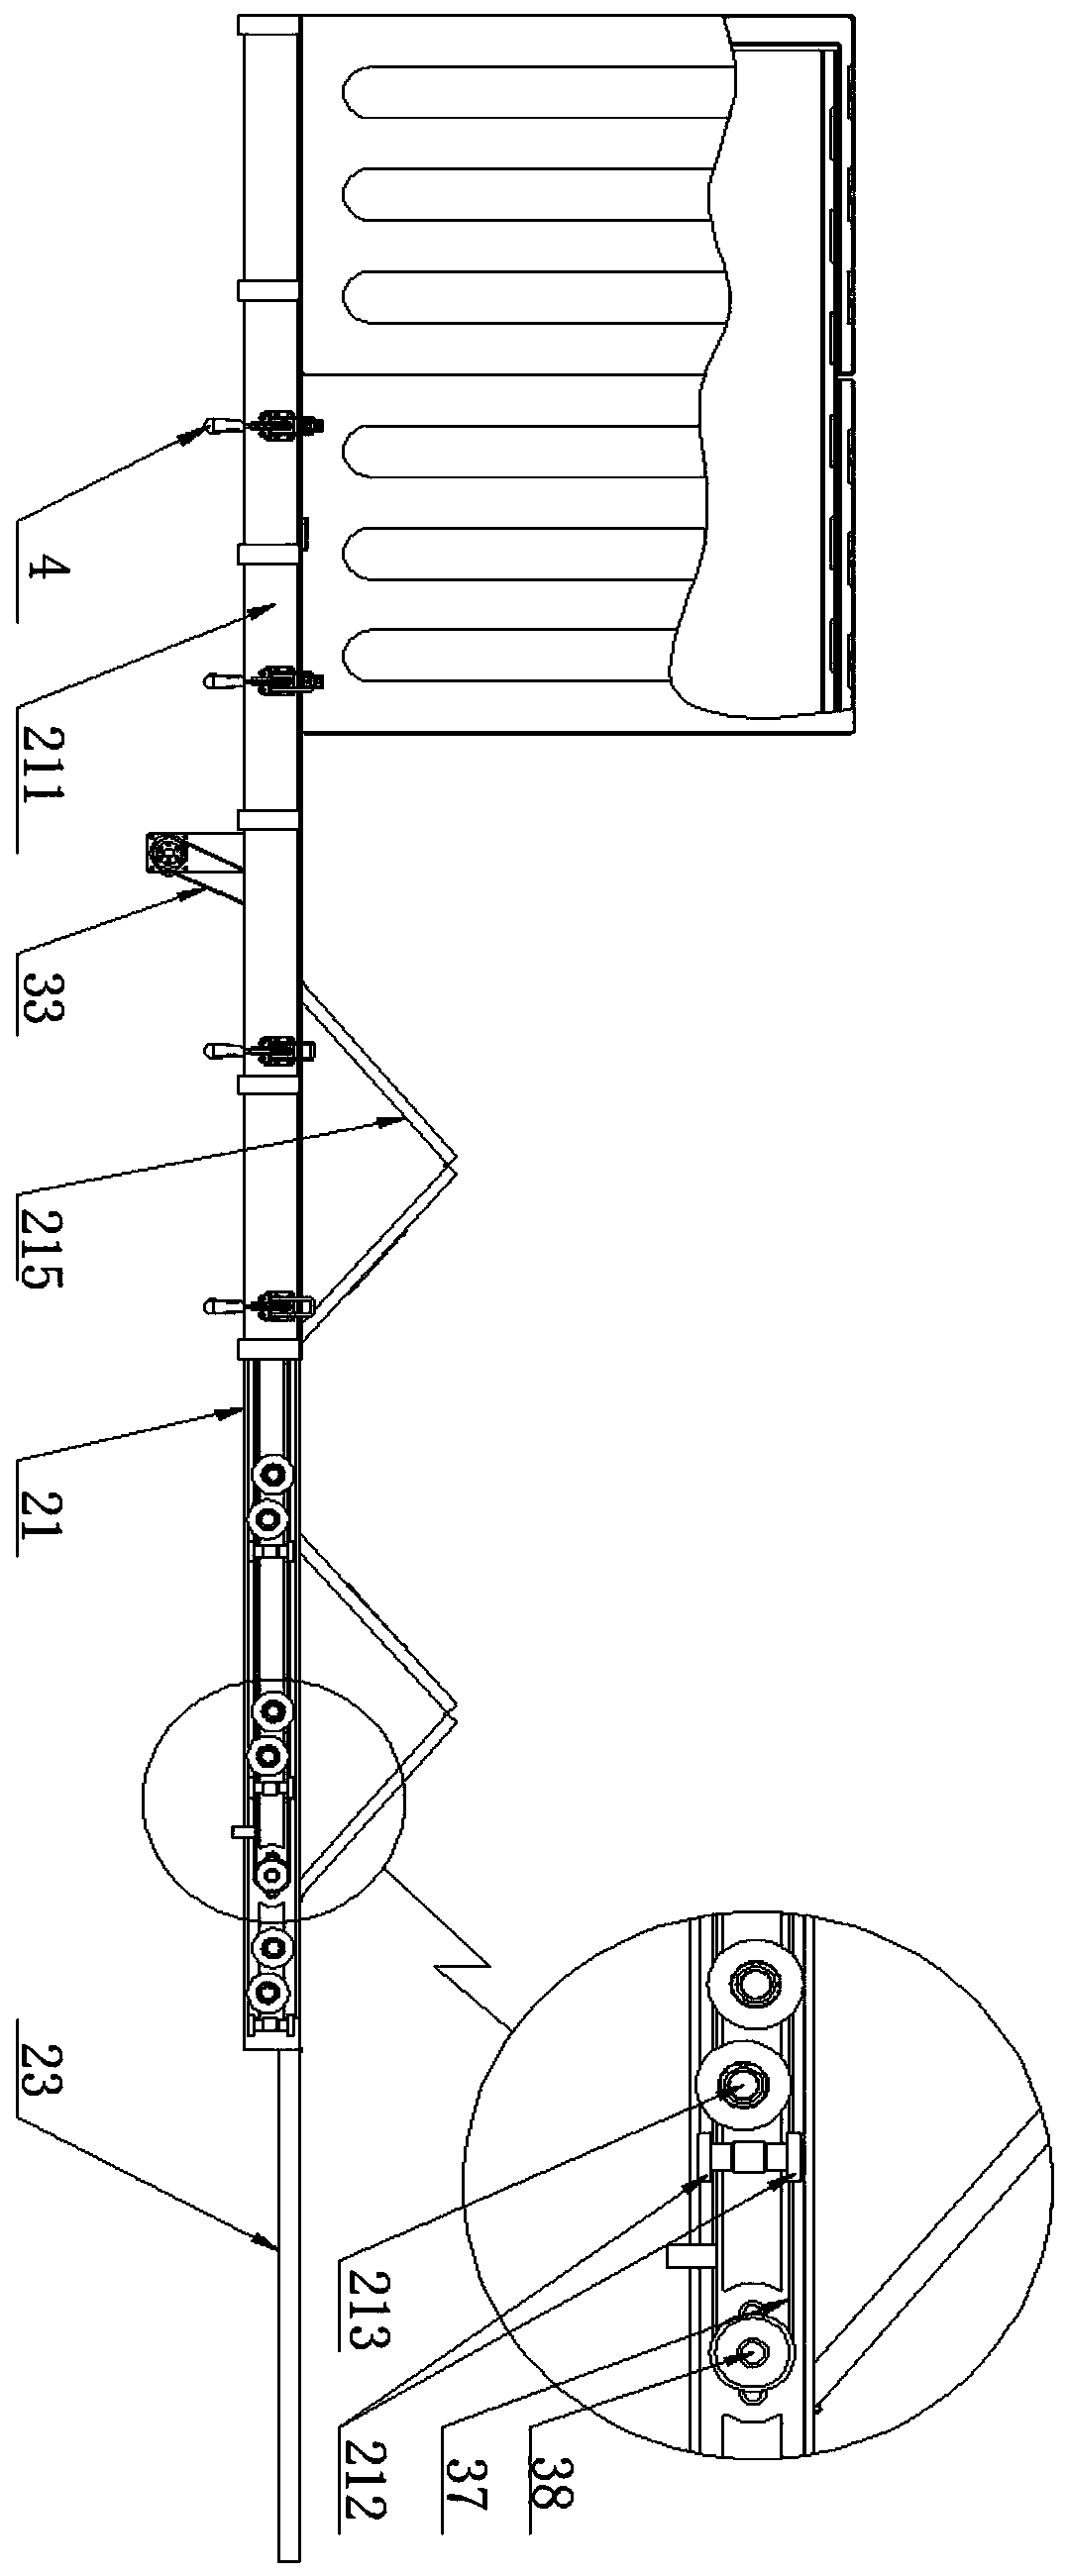 Retracting and releasing device for mooring unmanned aerial vehicle